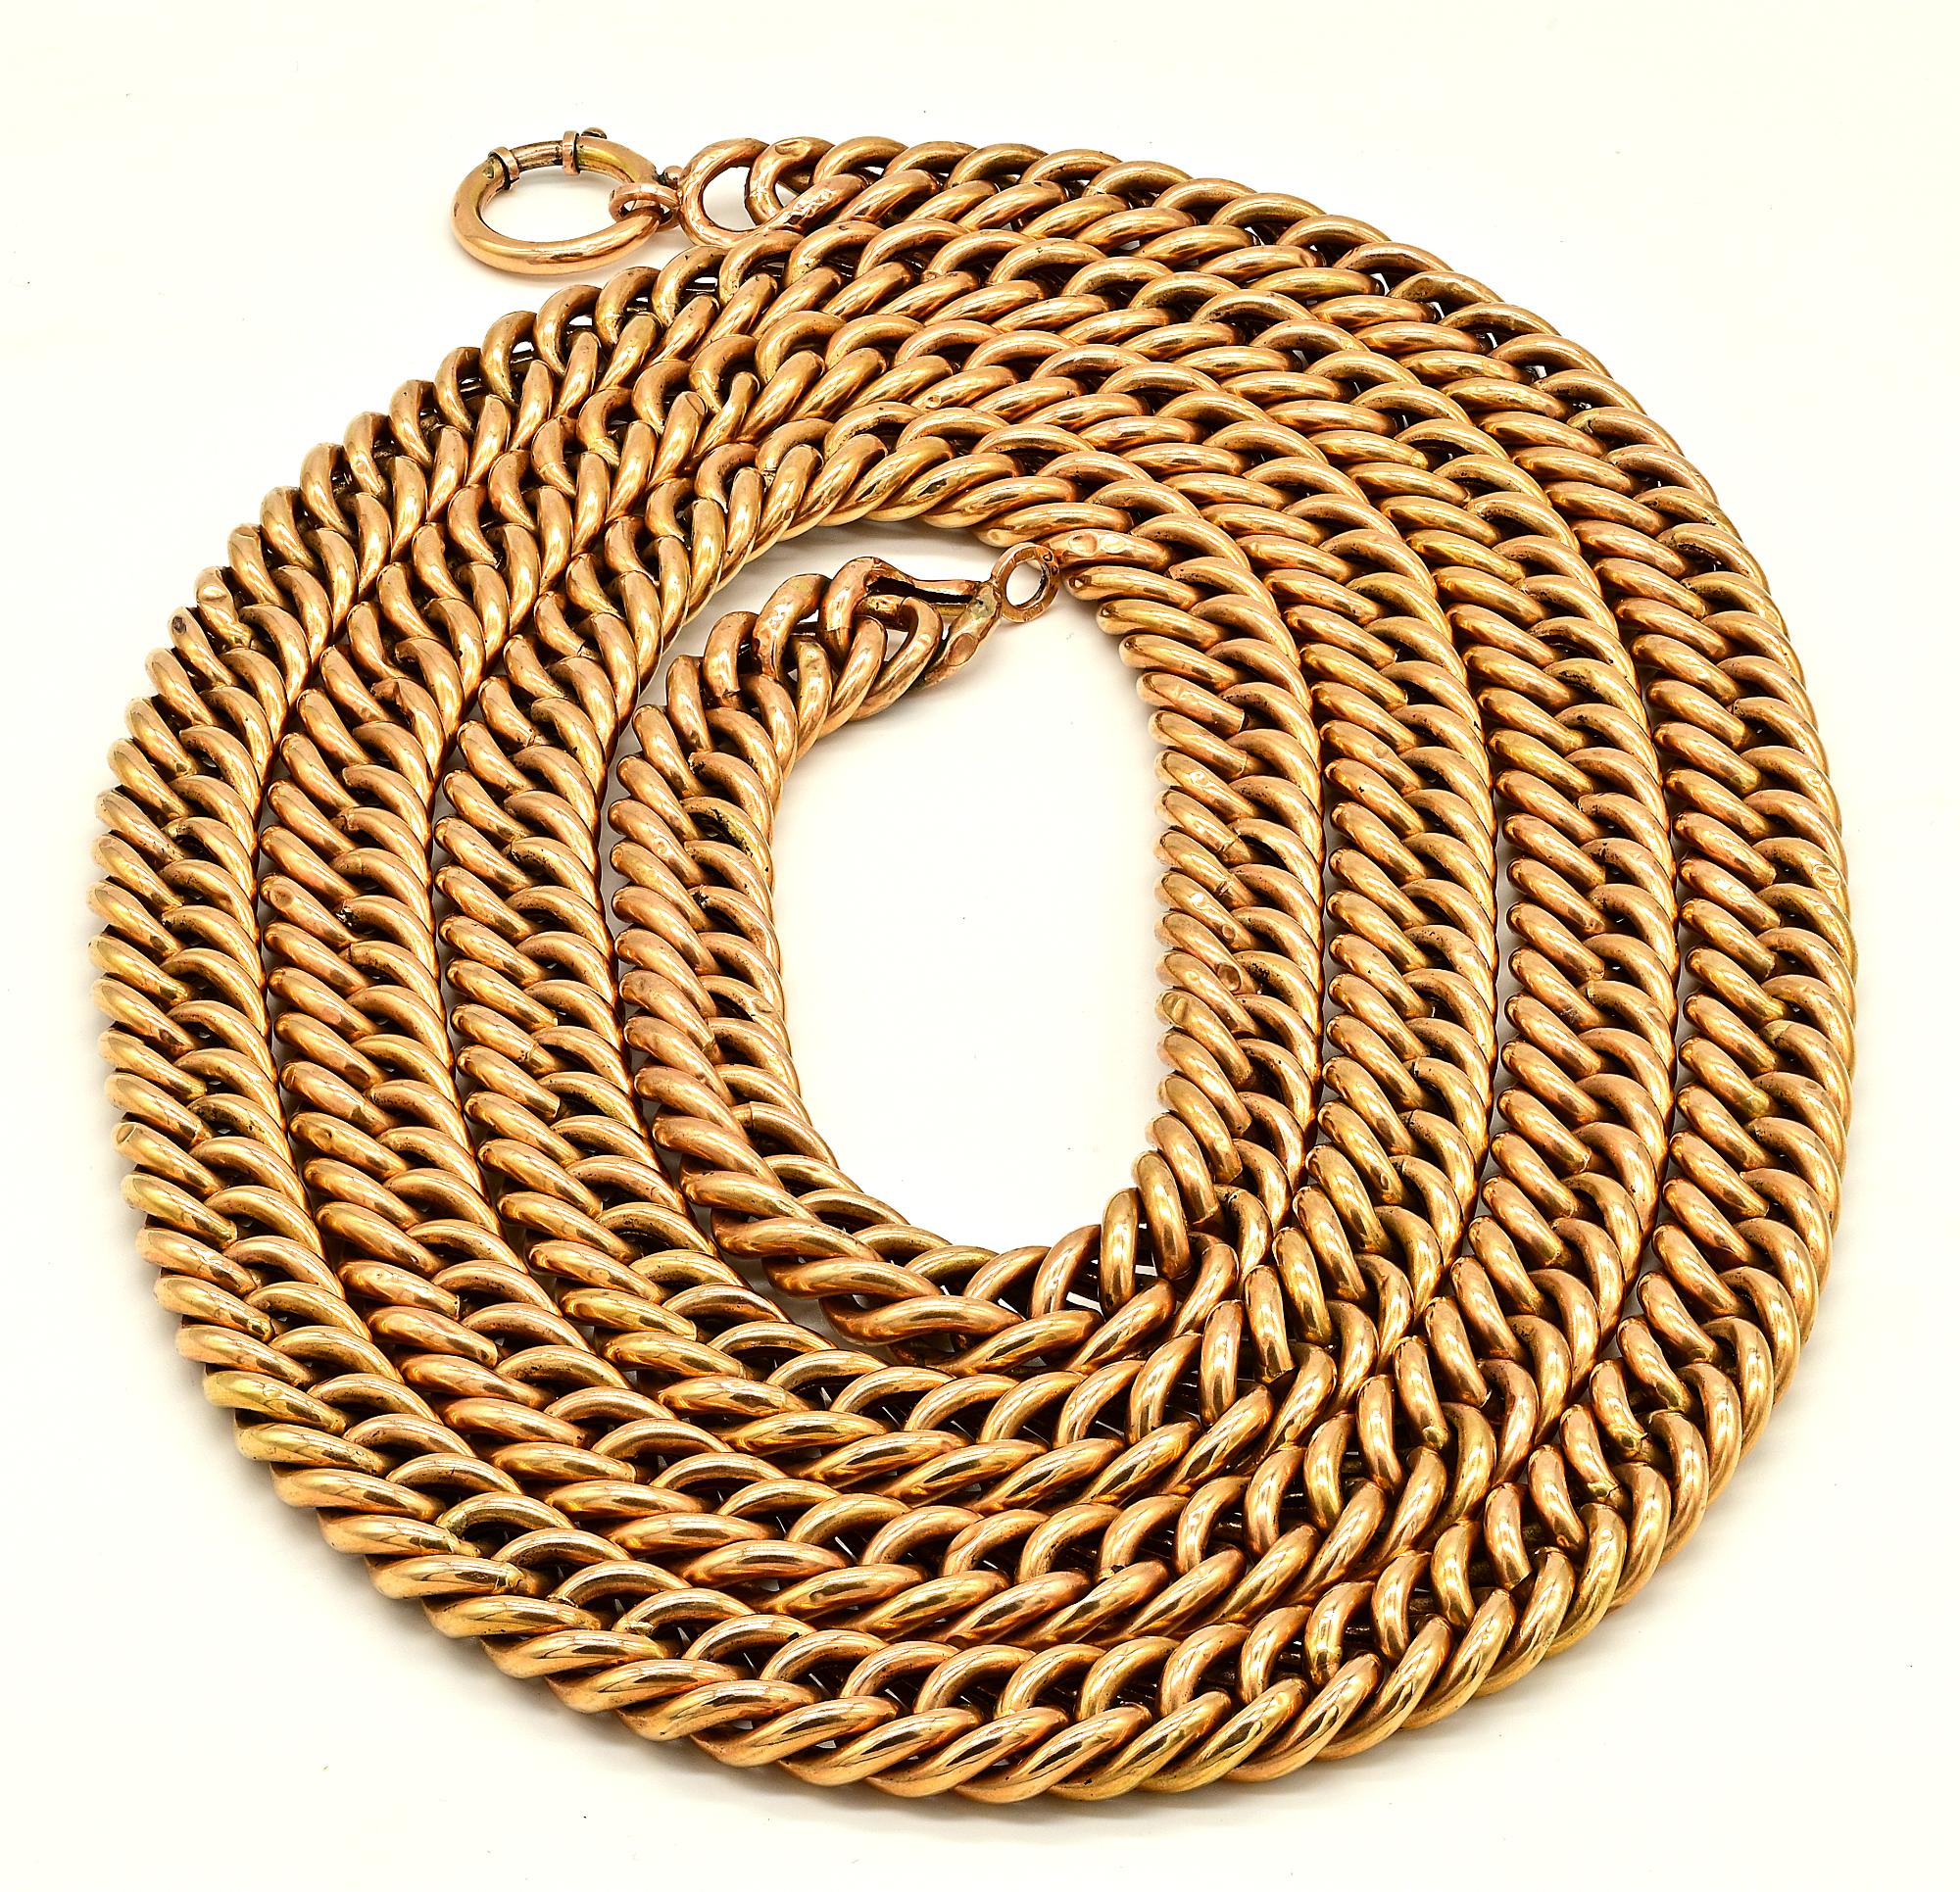 This amazing rare chain is Victorian period, 1880 circa
Hollow totally hand made Curb chain of immense beauty and incredible length of 1.82 mt equals to 1.99 yards
Incredible curb links 16 mm. wide
Solid 14 KT gold, bearing horse head hallmarks and